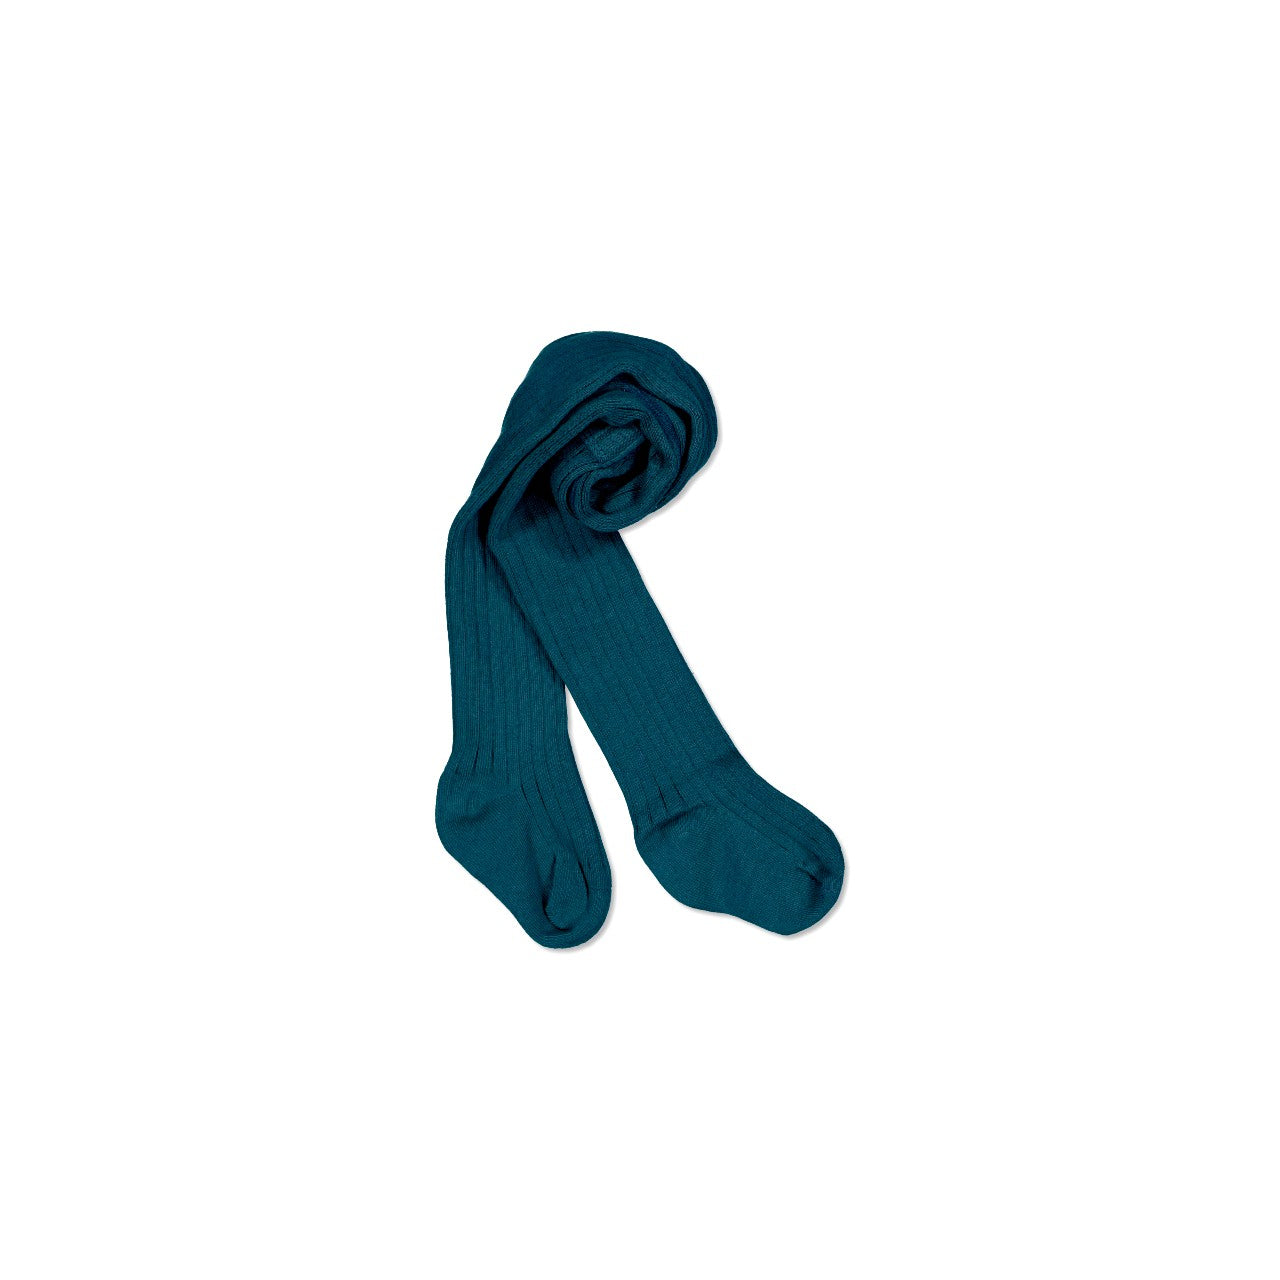 Footed Stockings - Teal